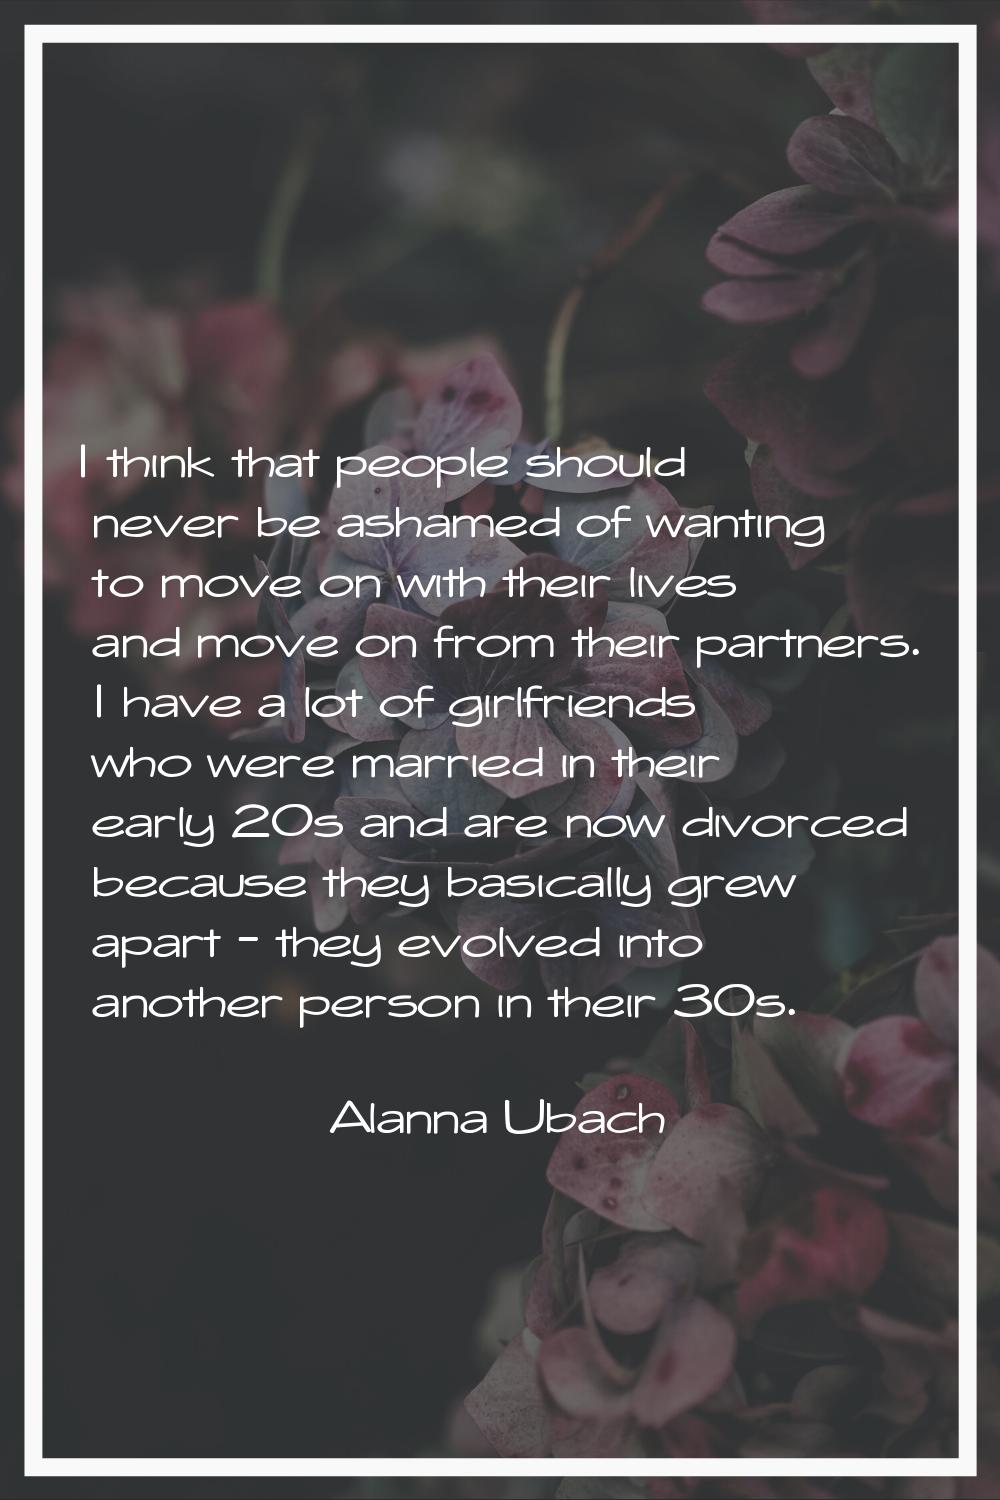 I think that people should never be ashamed of wanting to move on with their lives and move on from